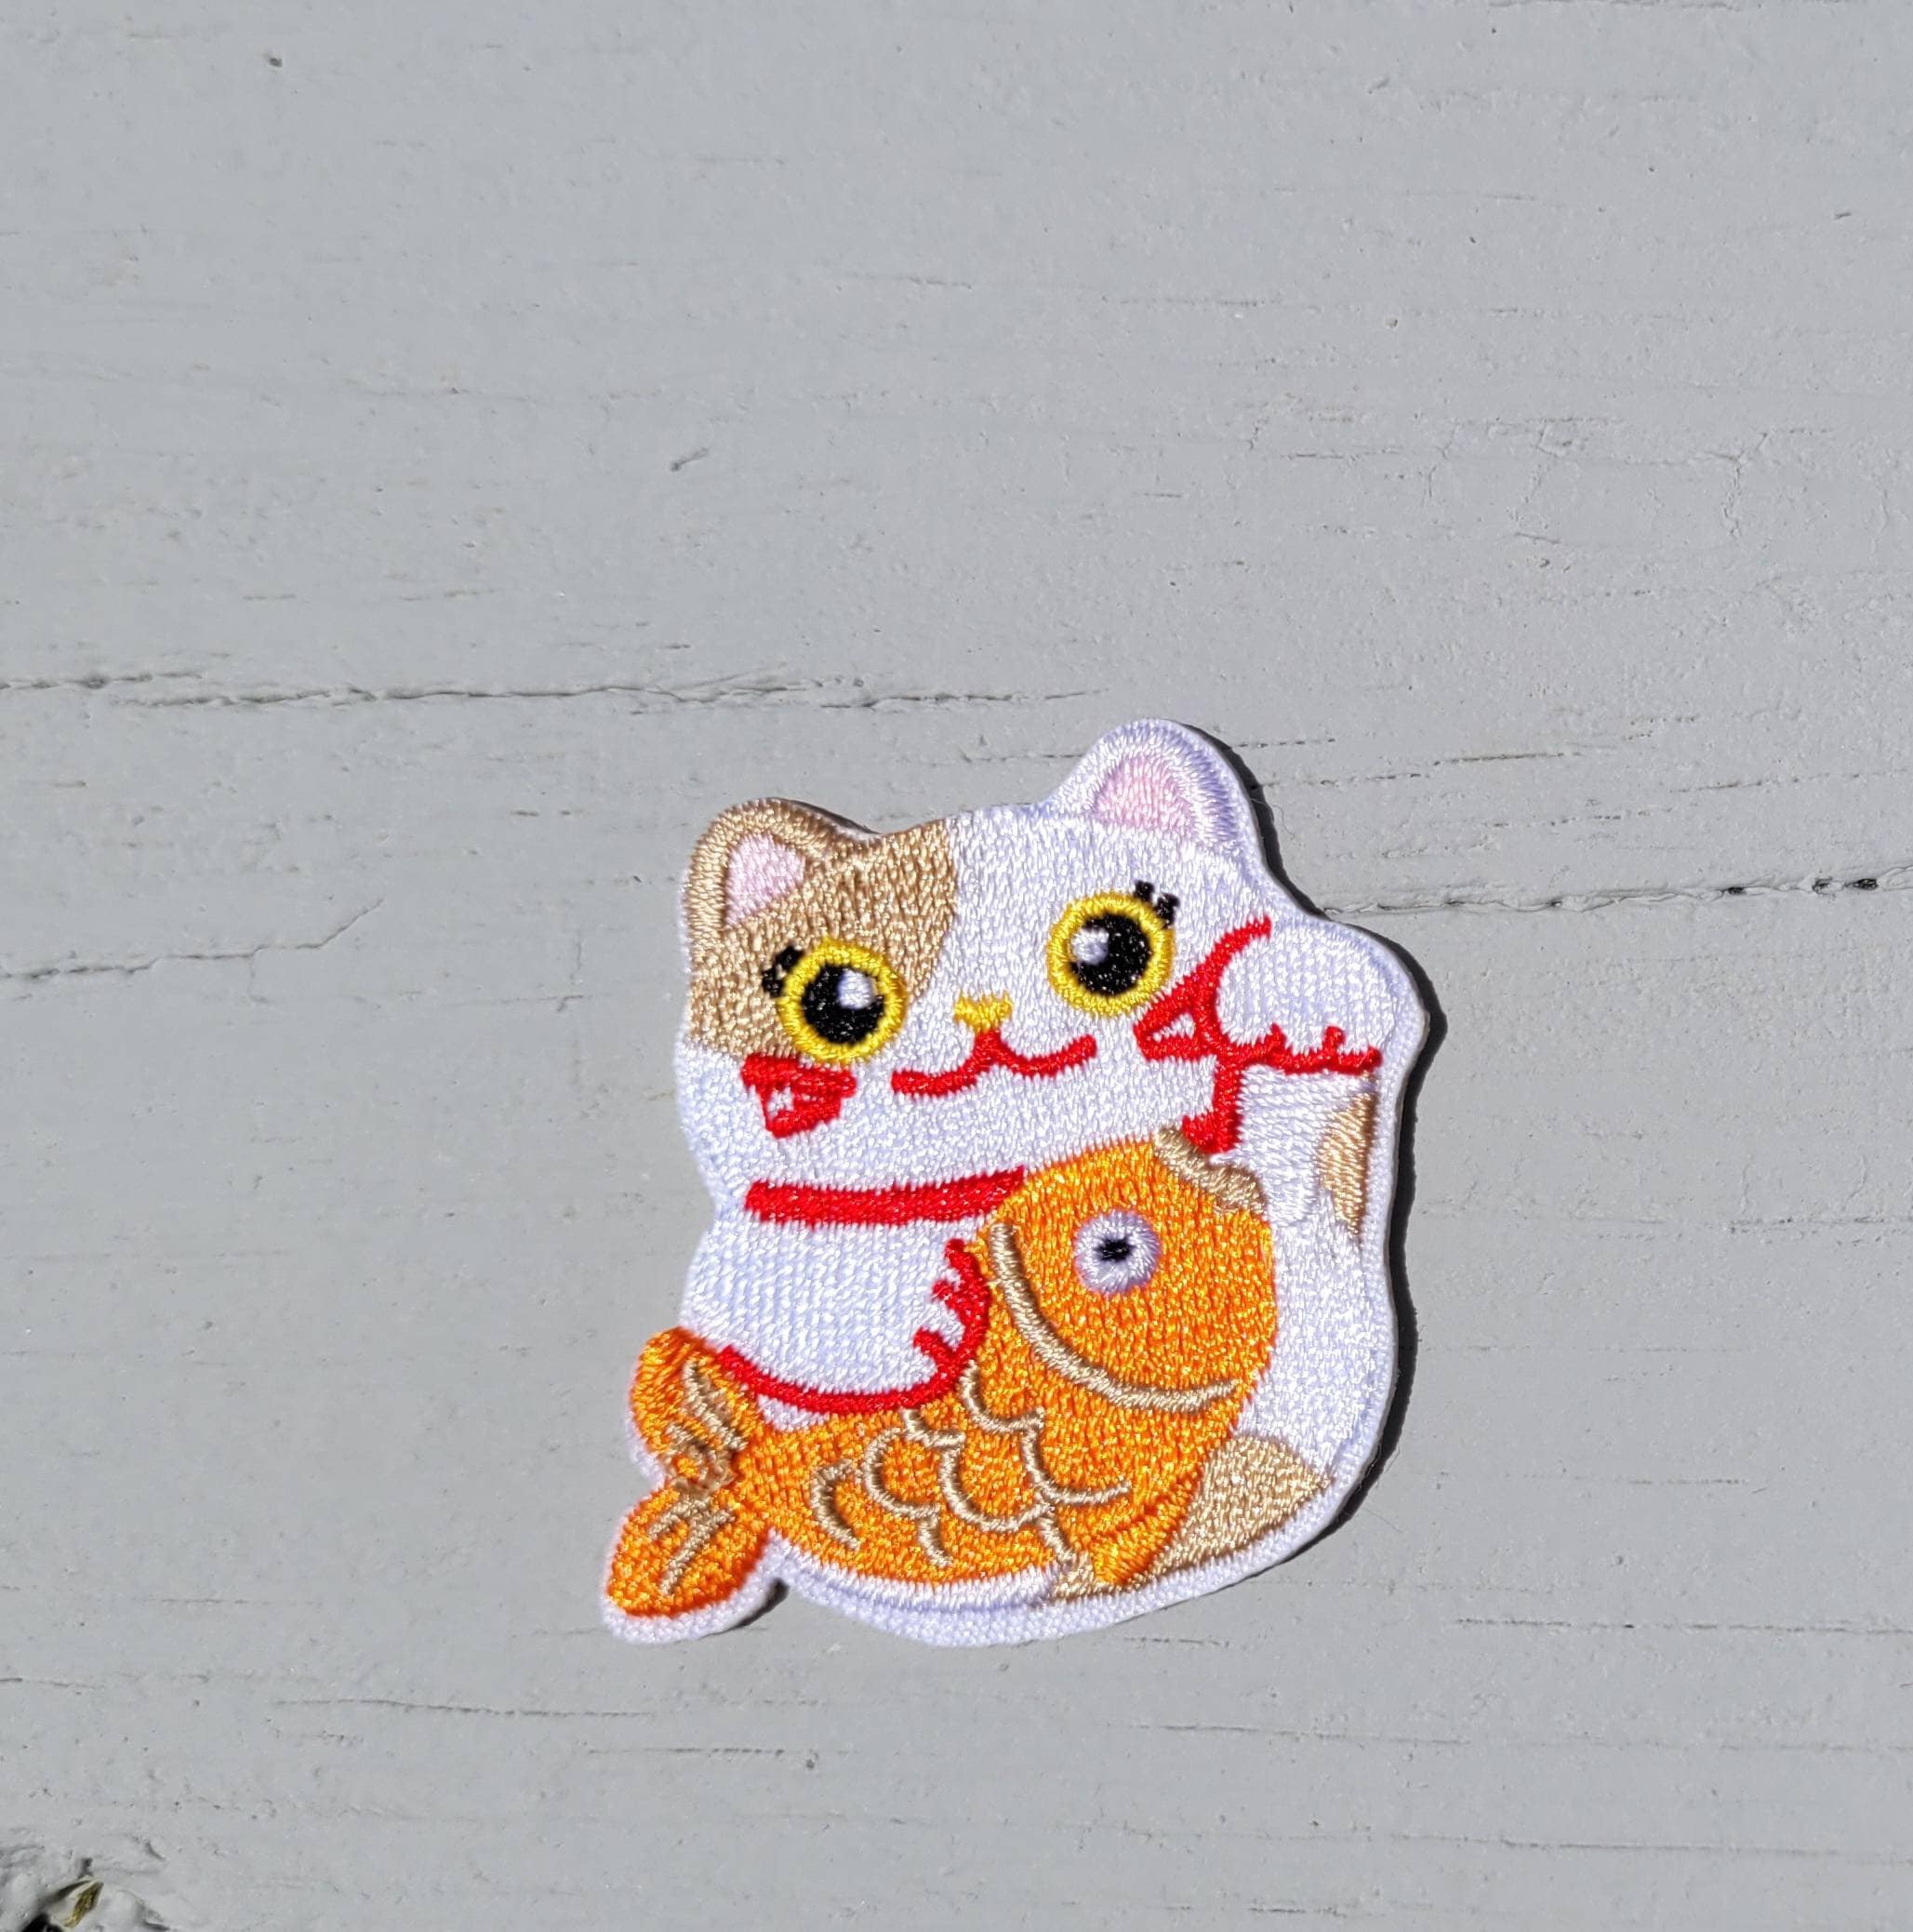 Cute Iron-On Patch for Child, 4pcs Funny Cartoon Japanese Lucky Cat Iron on Patches, Embroidered Sew on Patches Custom Tactical Patches for DIY